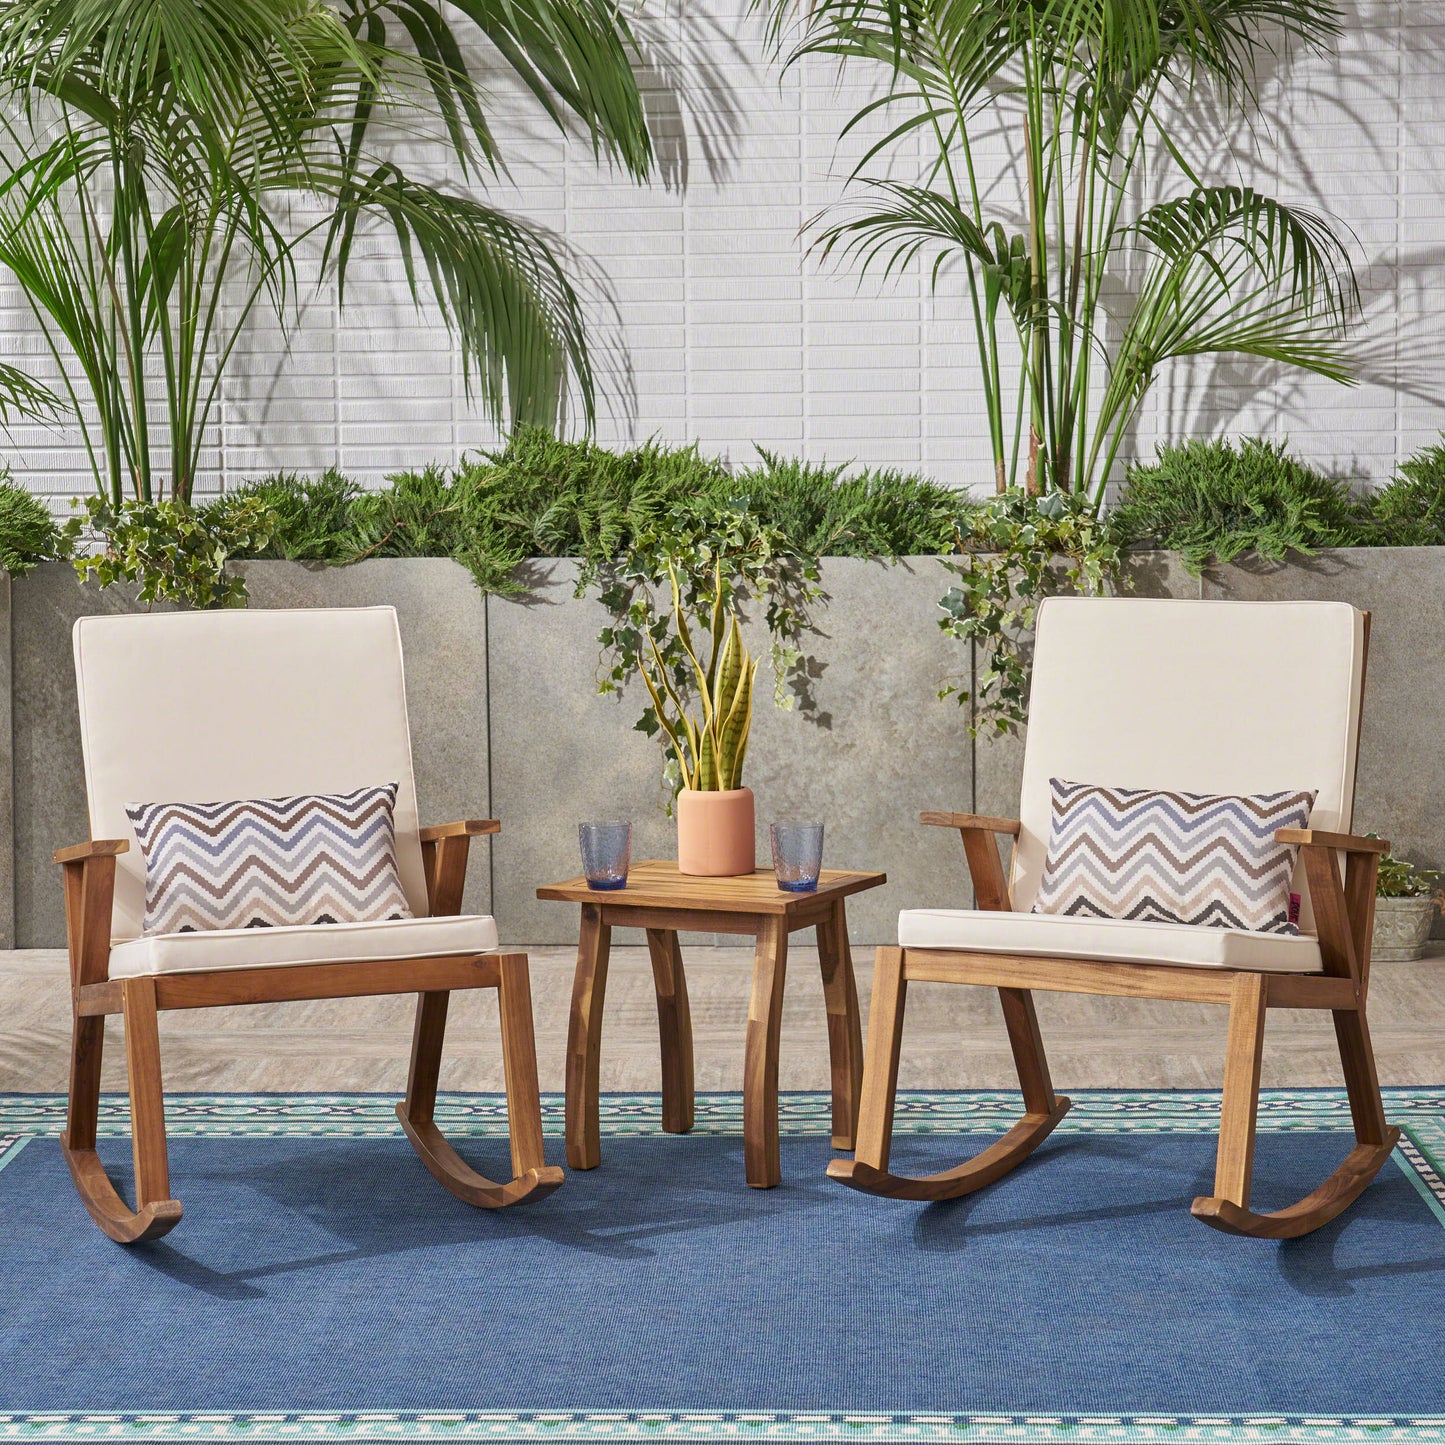 Alize Outdoor Acacia Wood Rocking Chair Chat Set